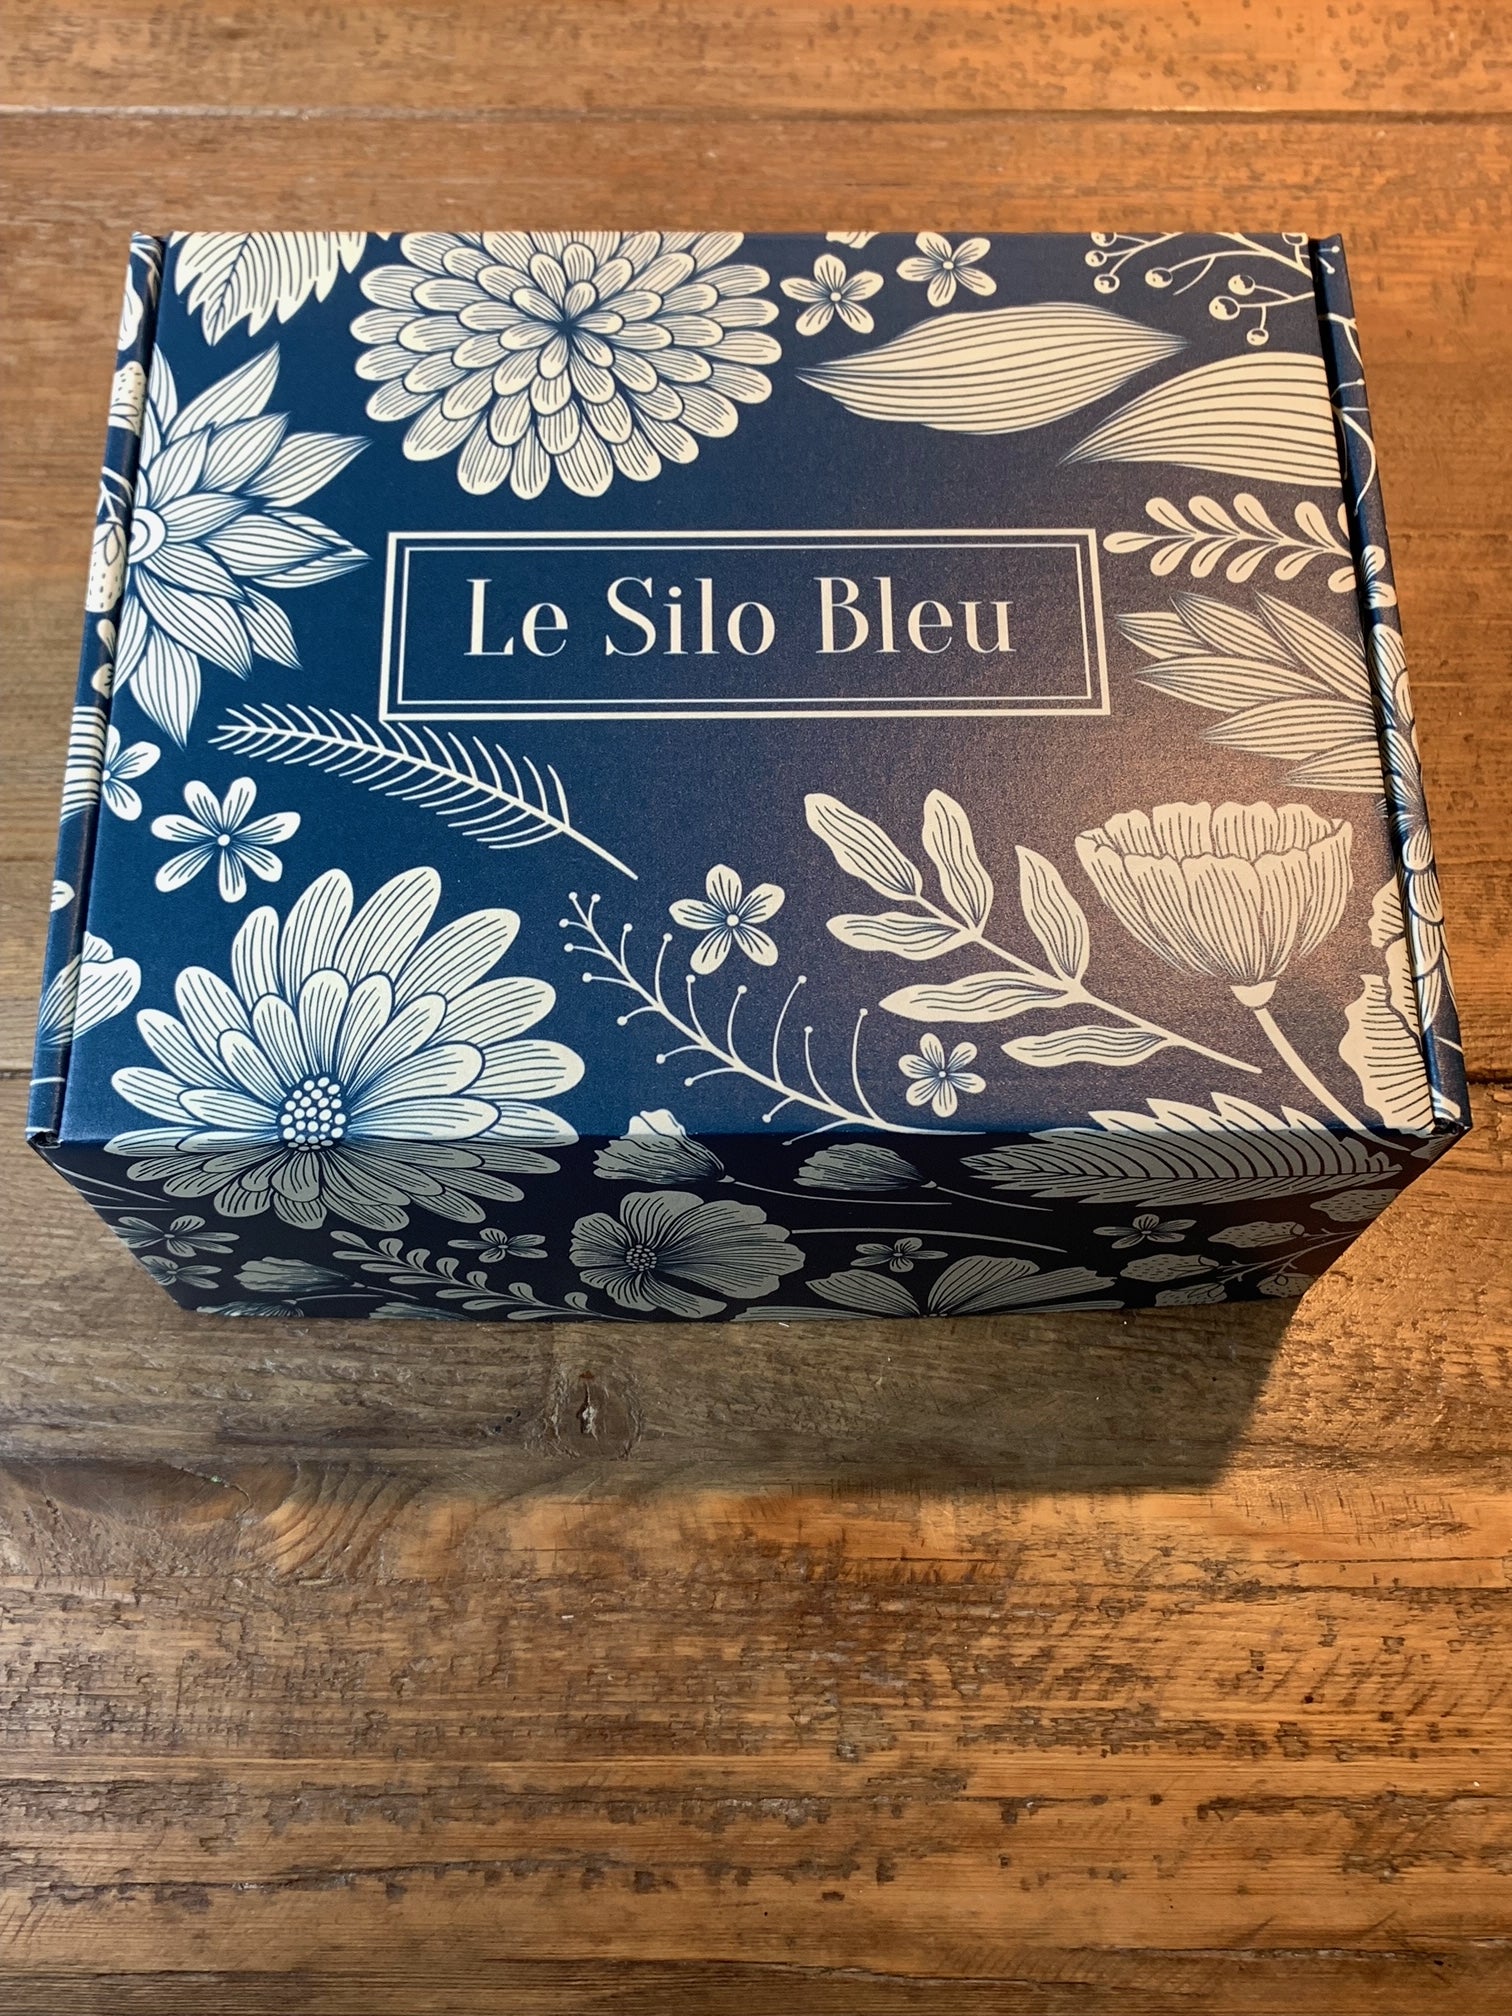 Le Silo Bleu branded premium gift box. Blue with white flowers and leaves imprinted on the box. 